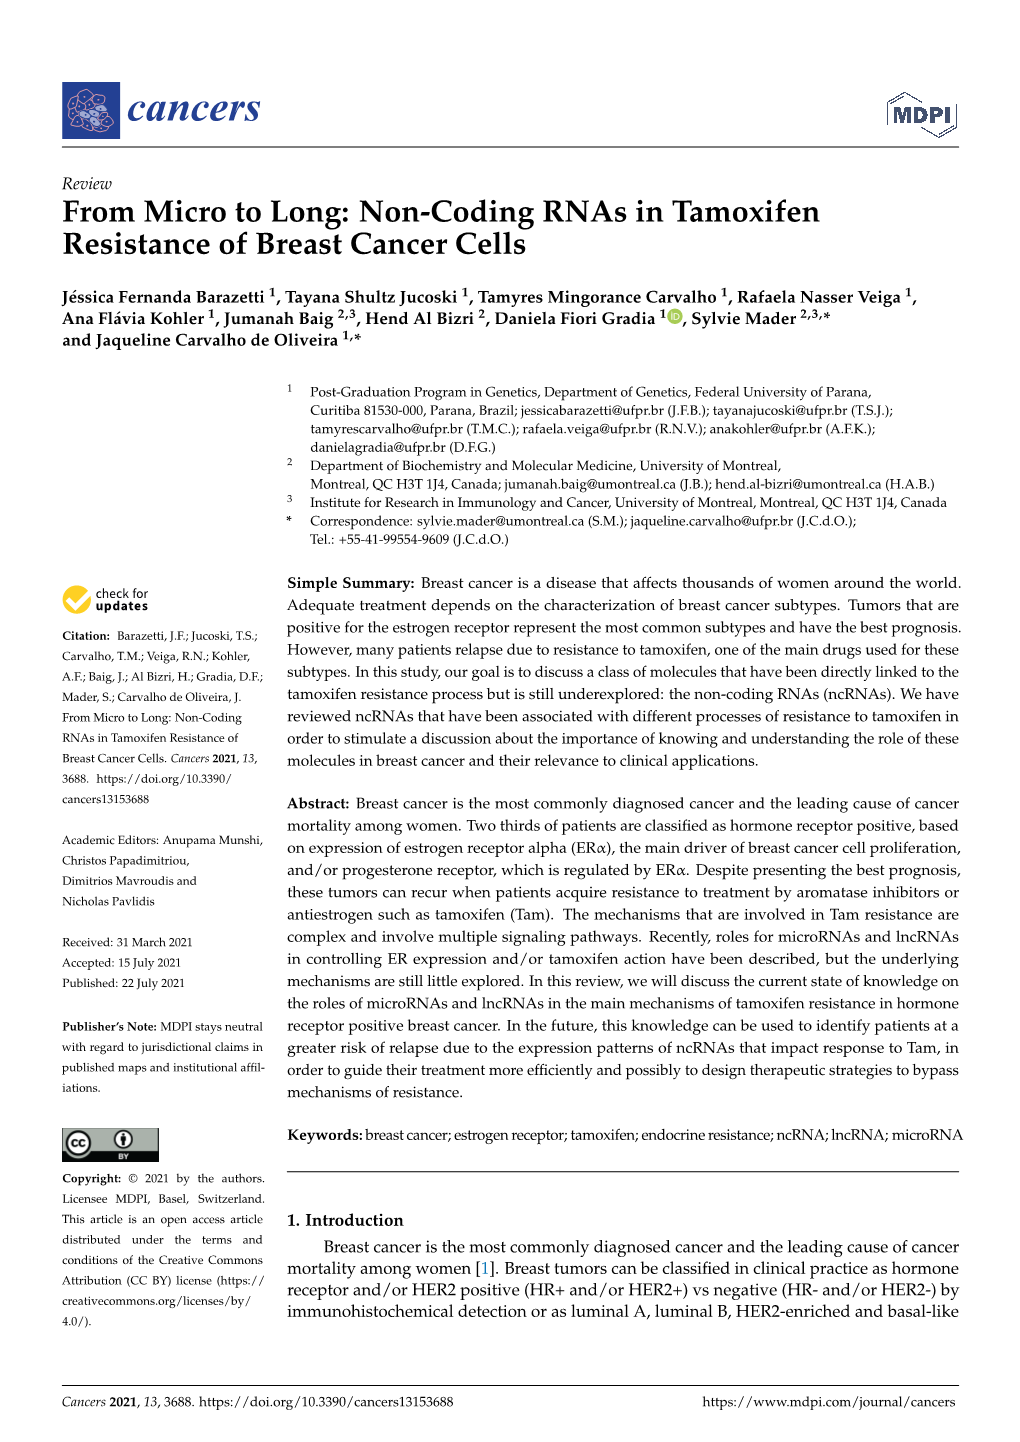 Non-Coding Rnas in Tamoxifen Resistance of Breast Cancer Cells